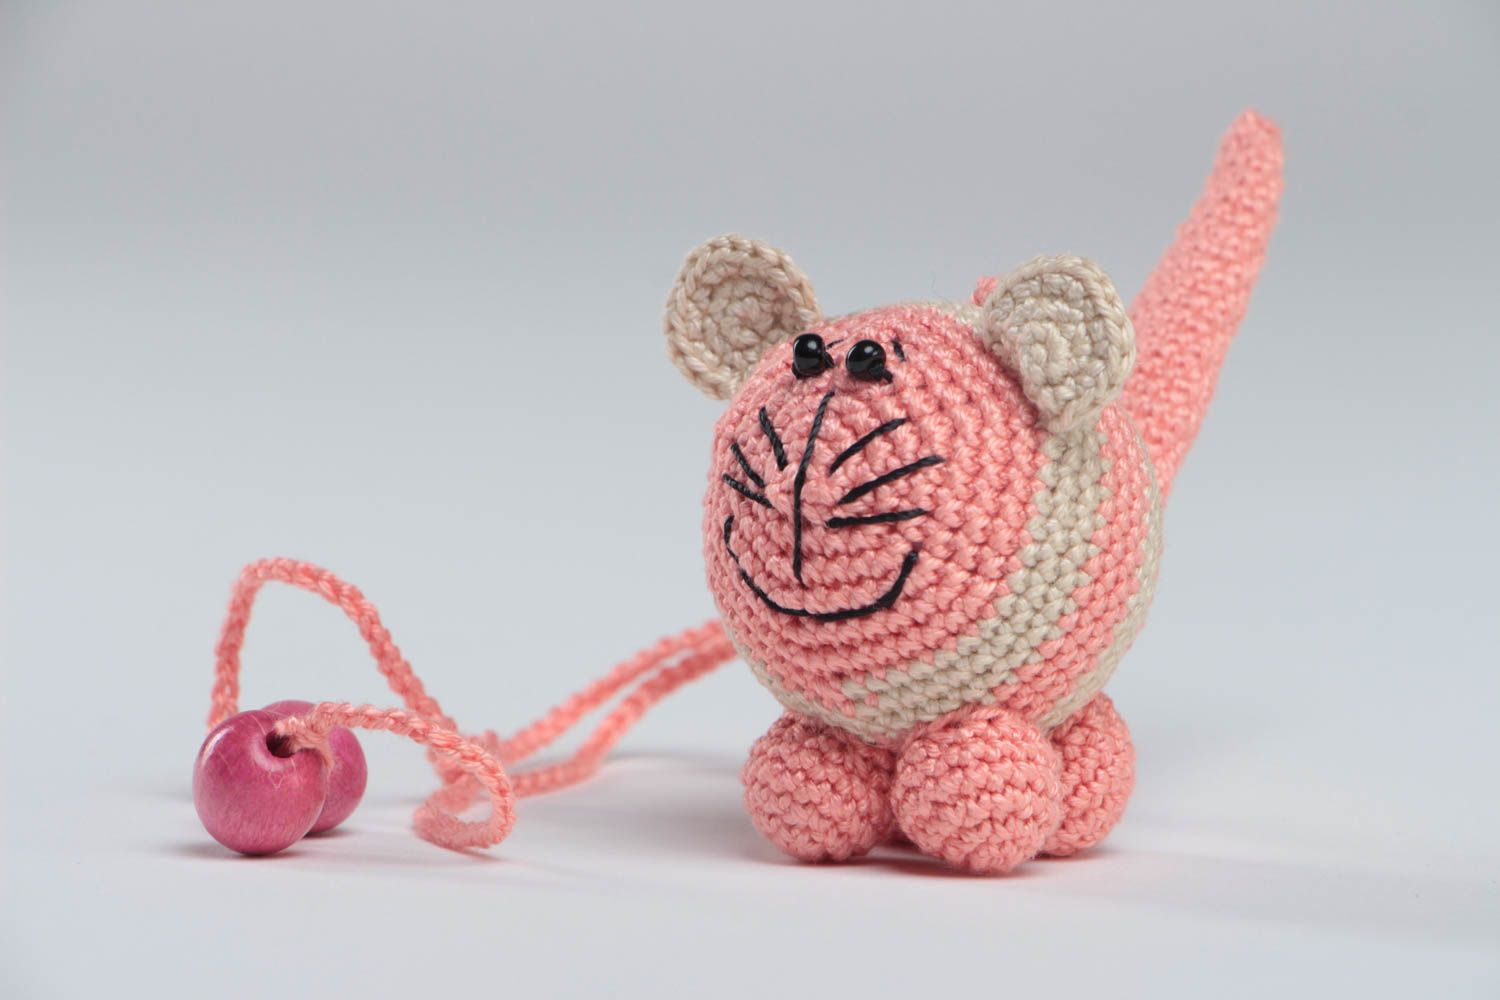 Crocheted cotton rattle small pink cat handmade toy for children and nursery photo 2